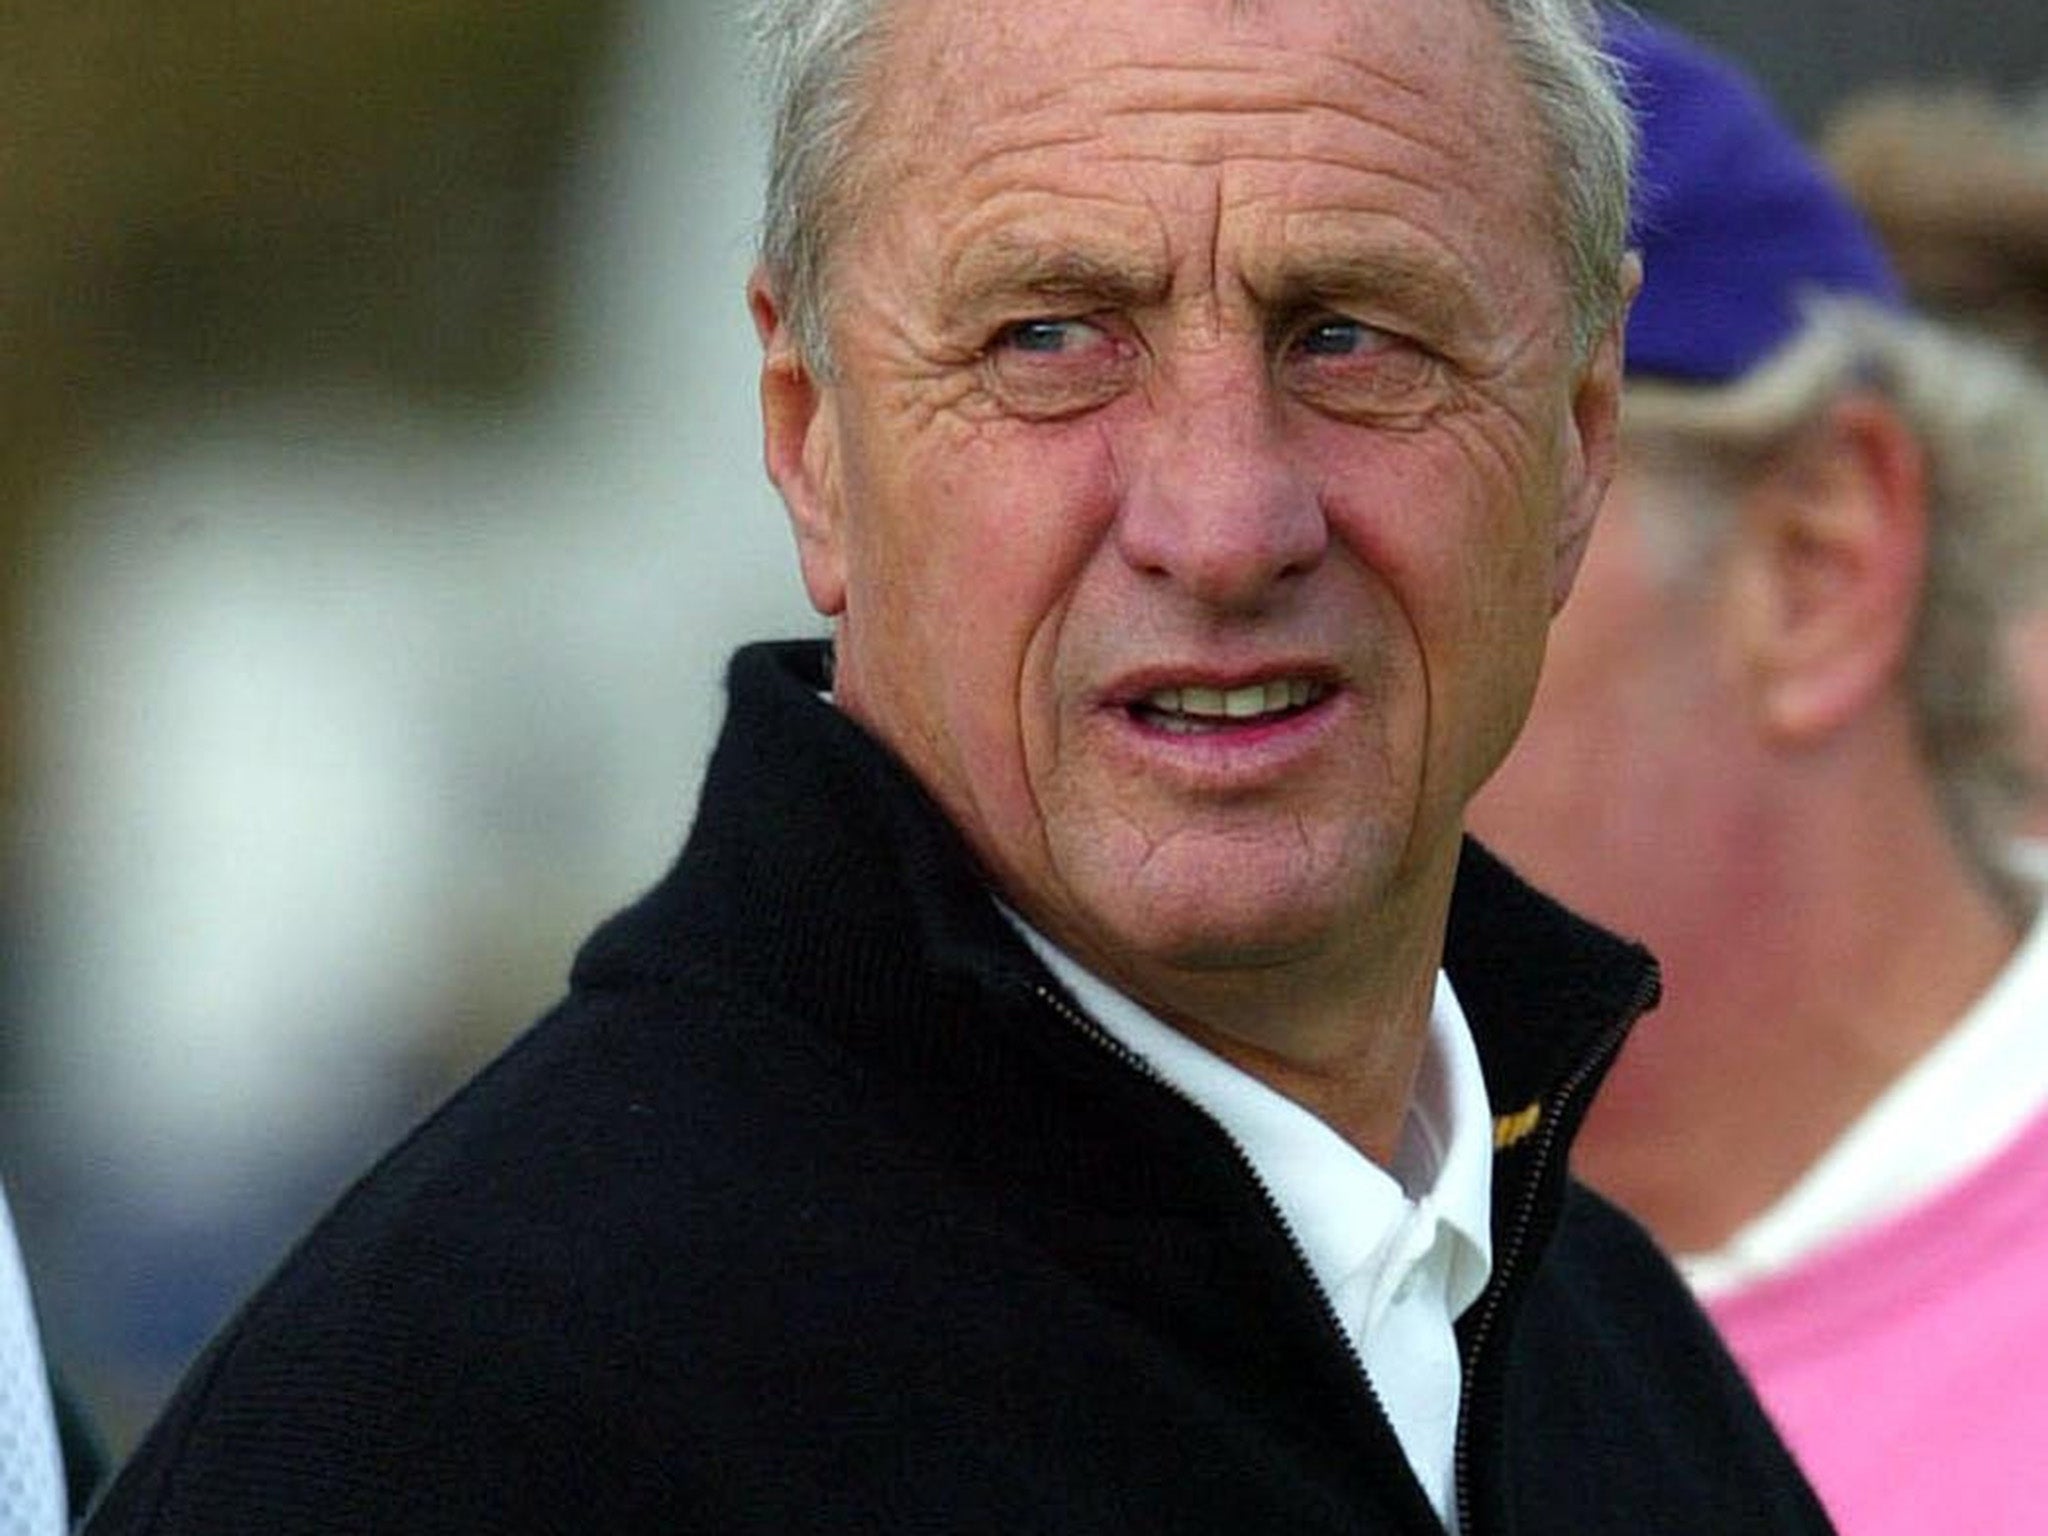 Dutch great Johan Cruyff has died aged 68 after a battle with cancer